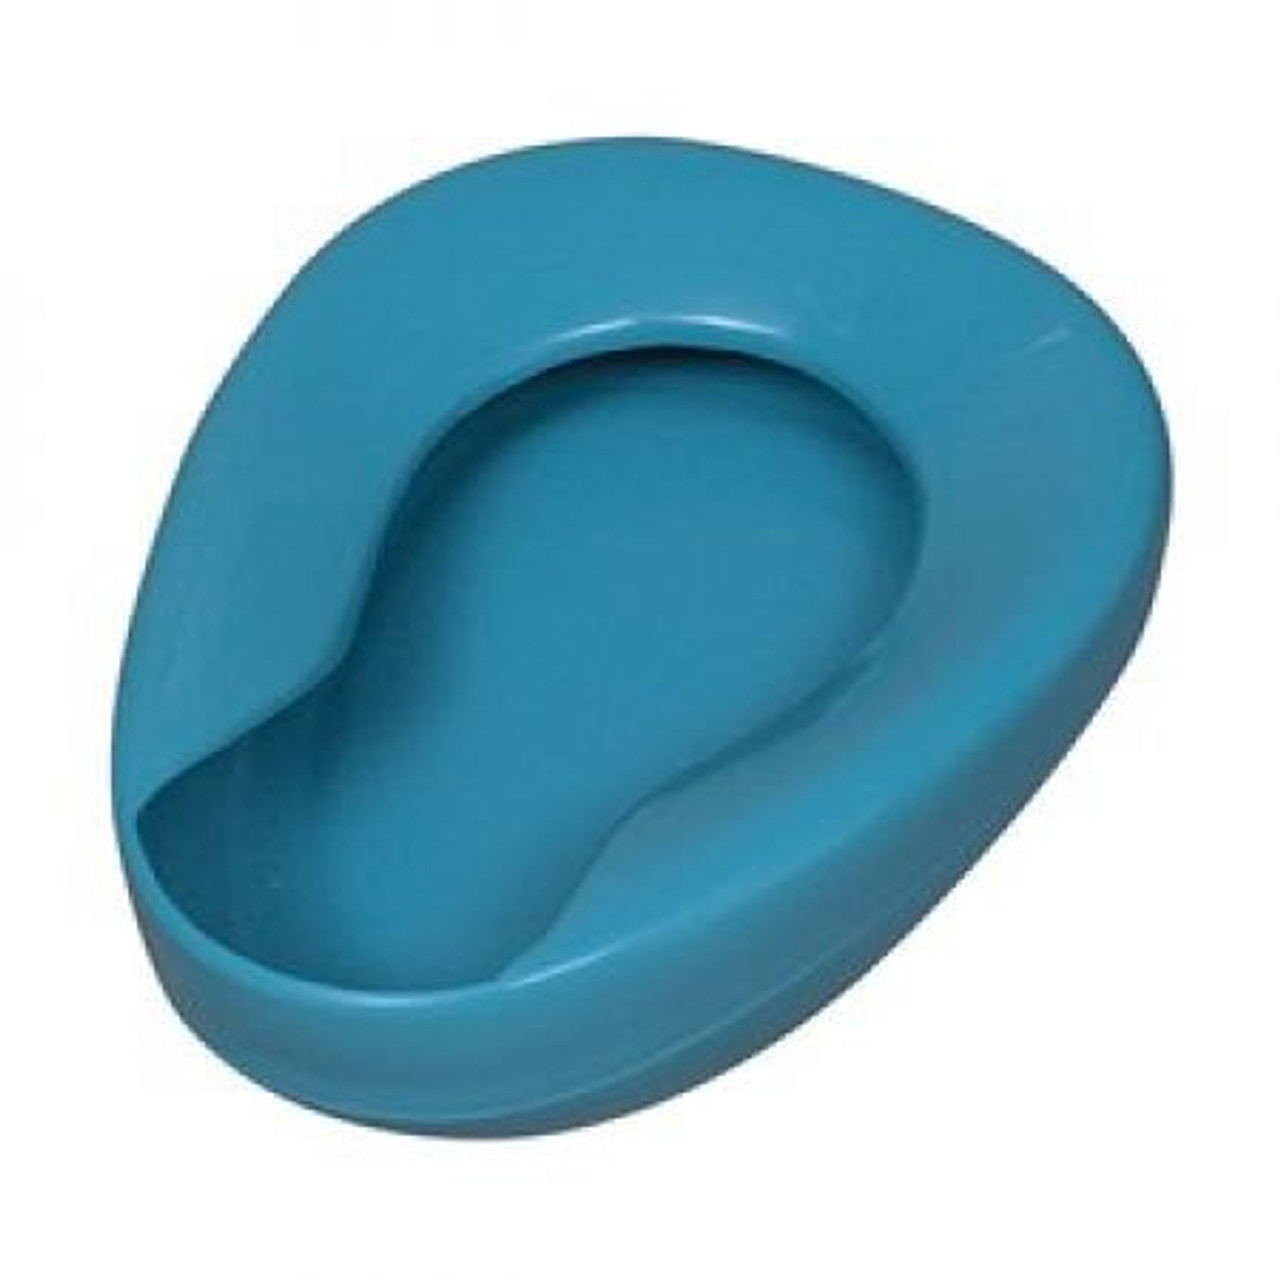 EA/1 ADULT PLASTIC BEDPAN AUTOCLAVABLE, 14IN X 11.4IN